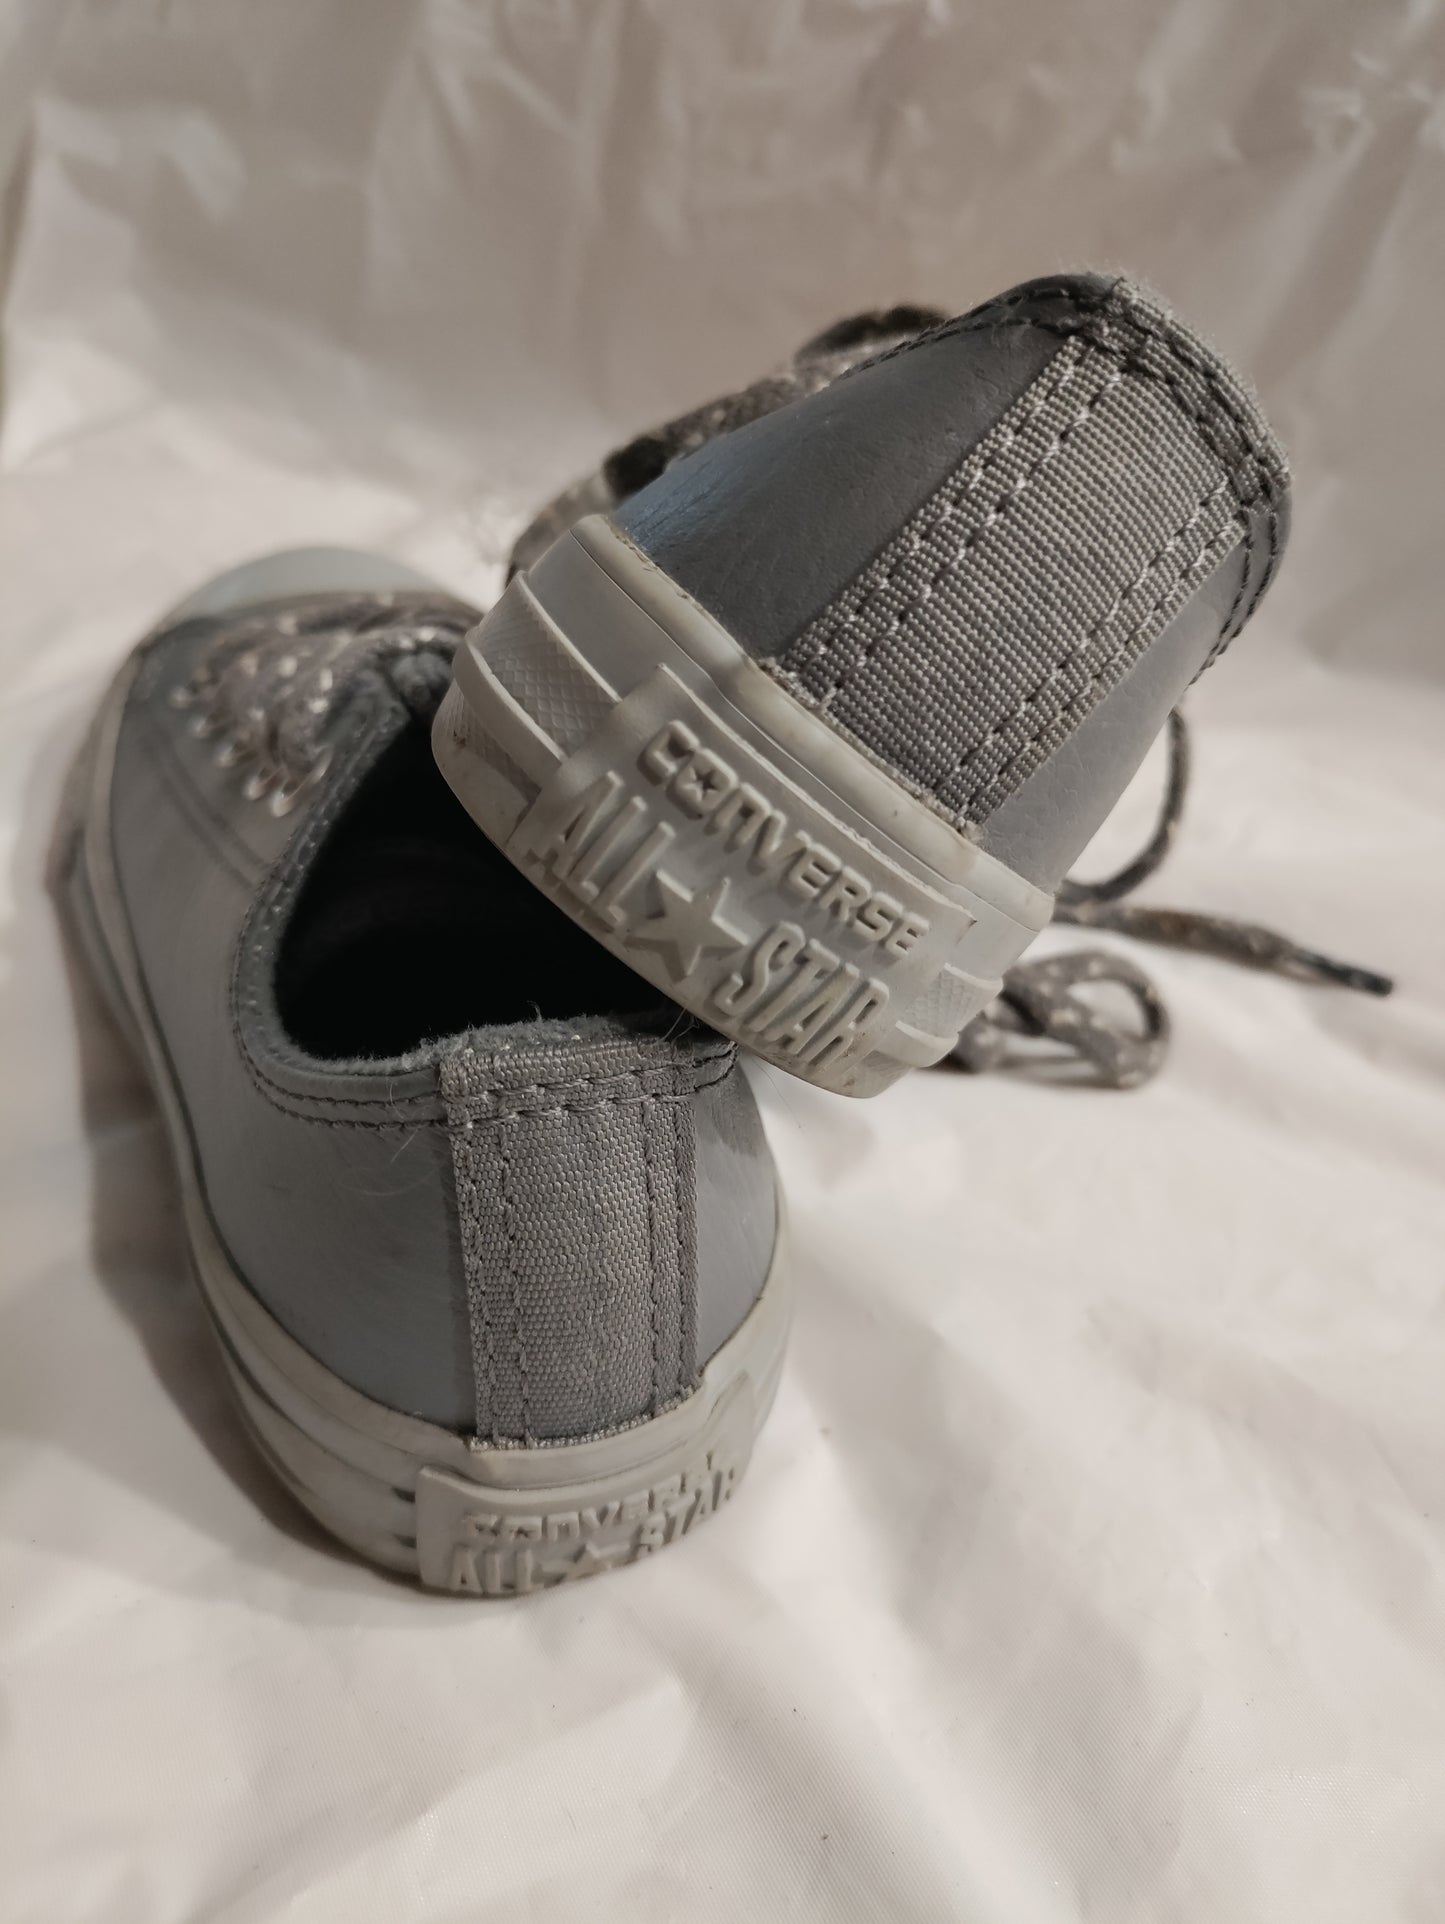 Converse, gray leather boys or girls size 11c. EUC